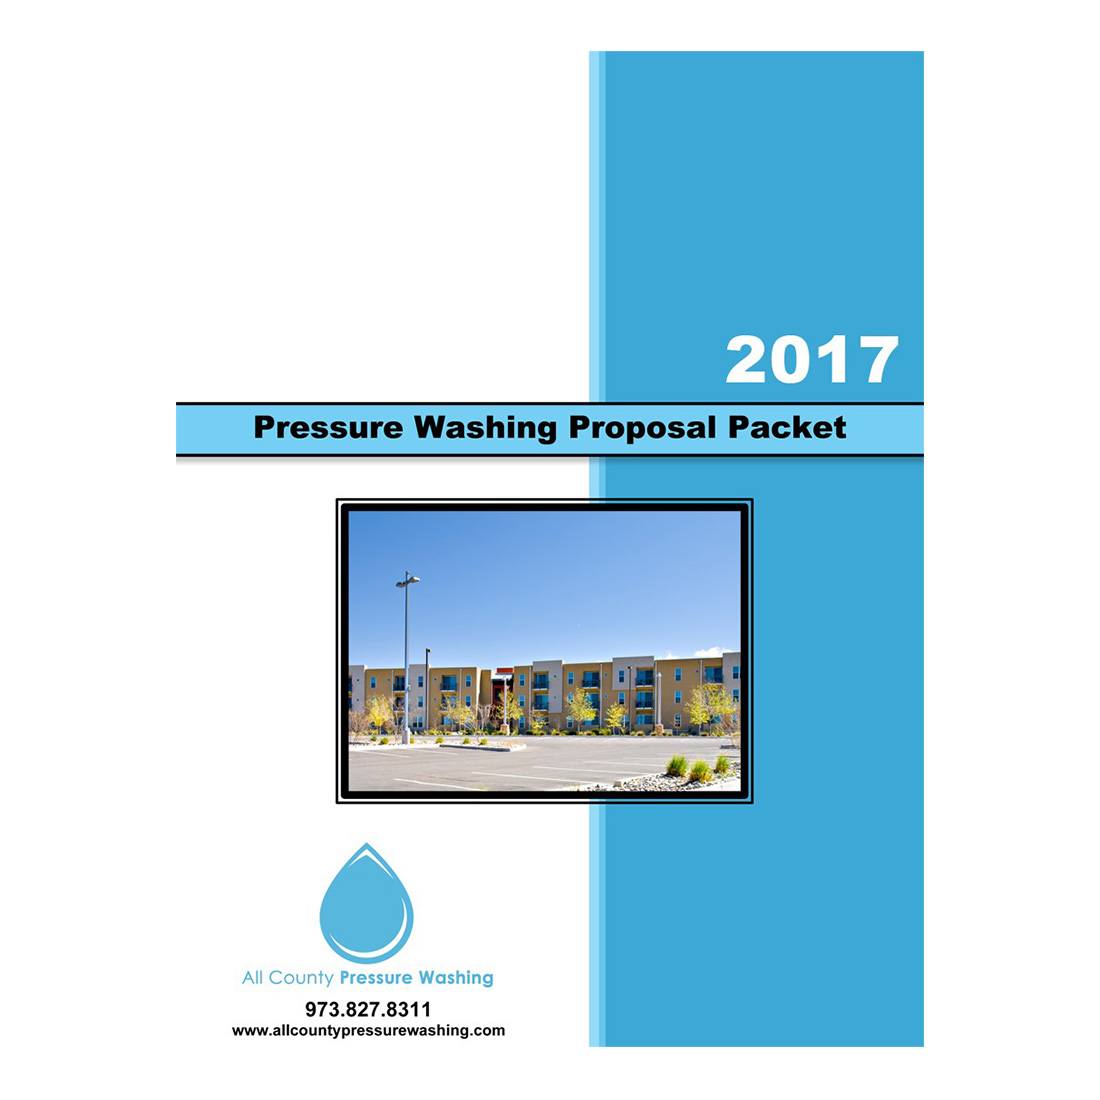 Housing Association - Pressure Washing Proposal Packet Front View